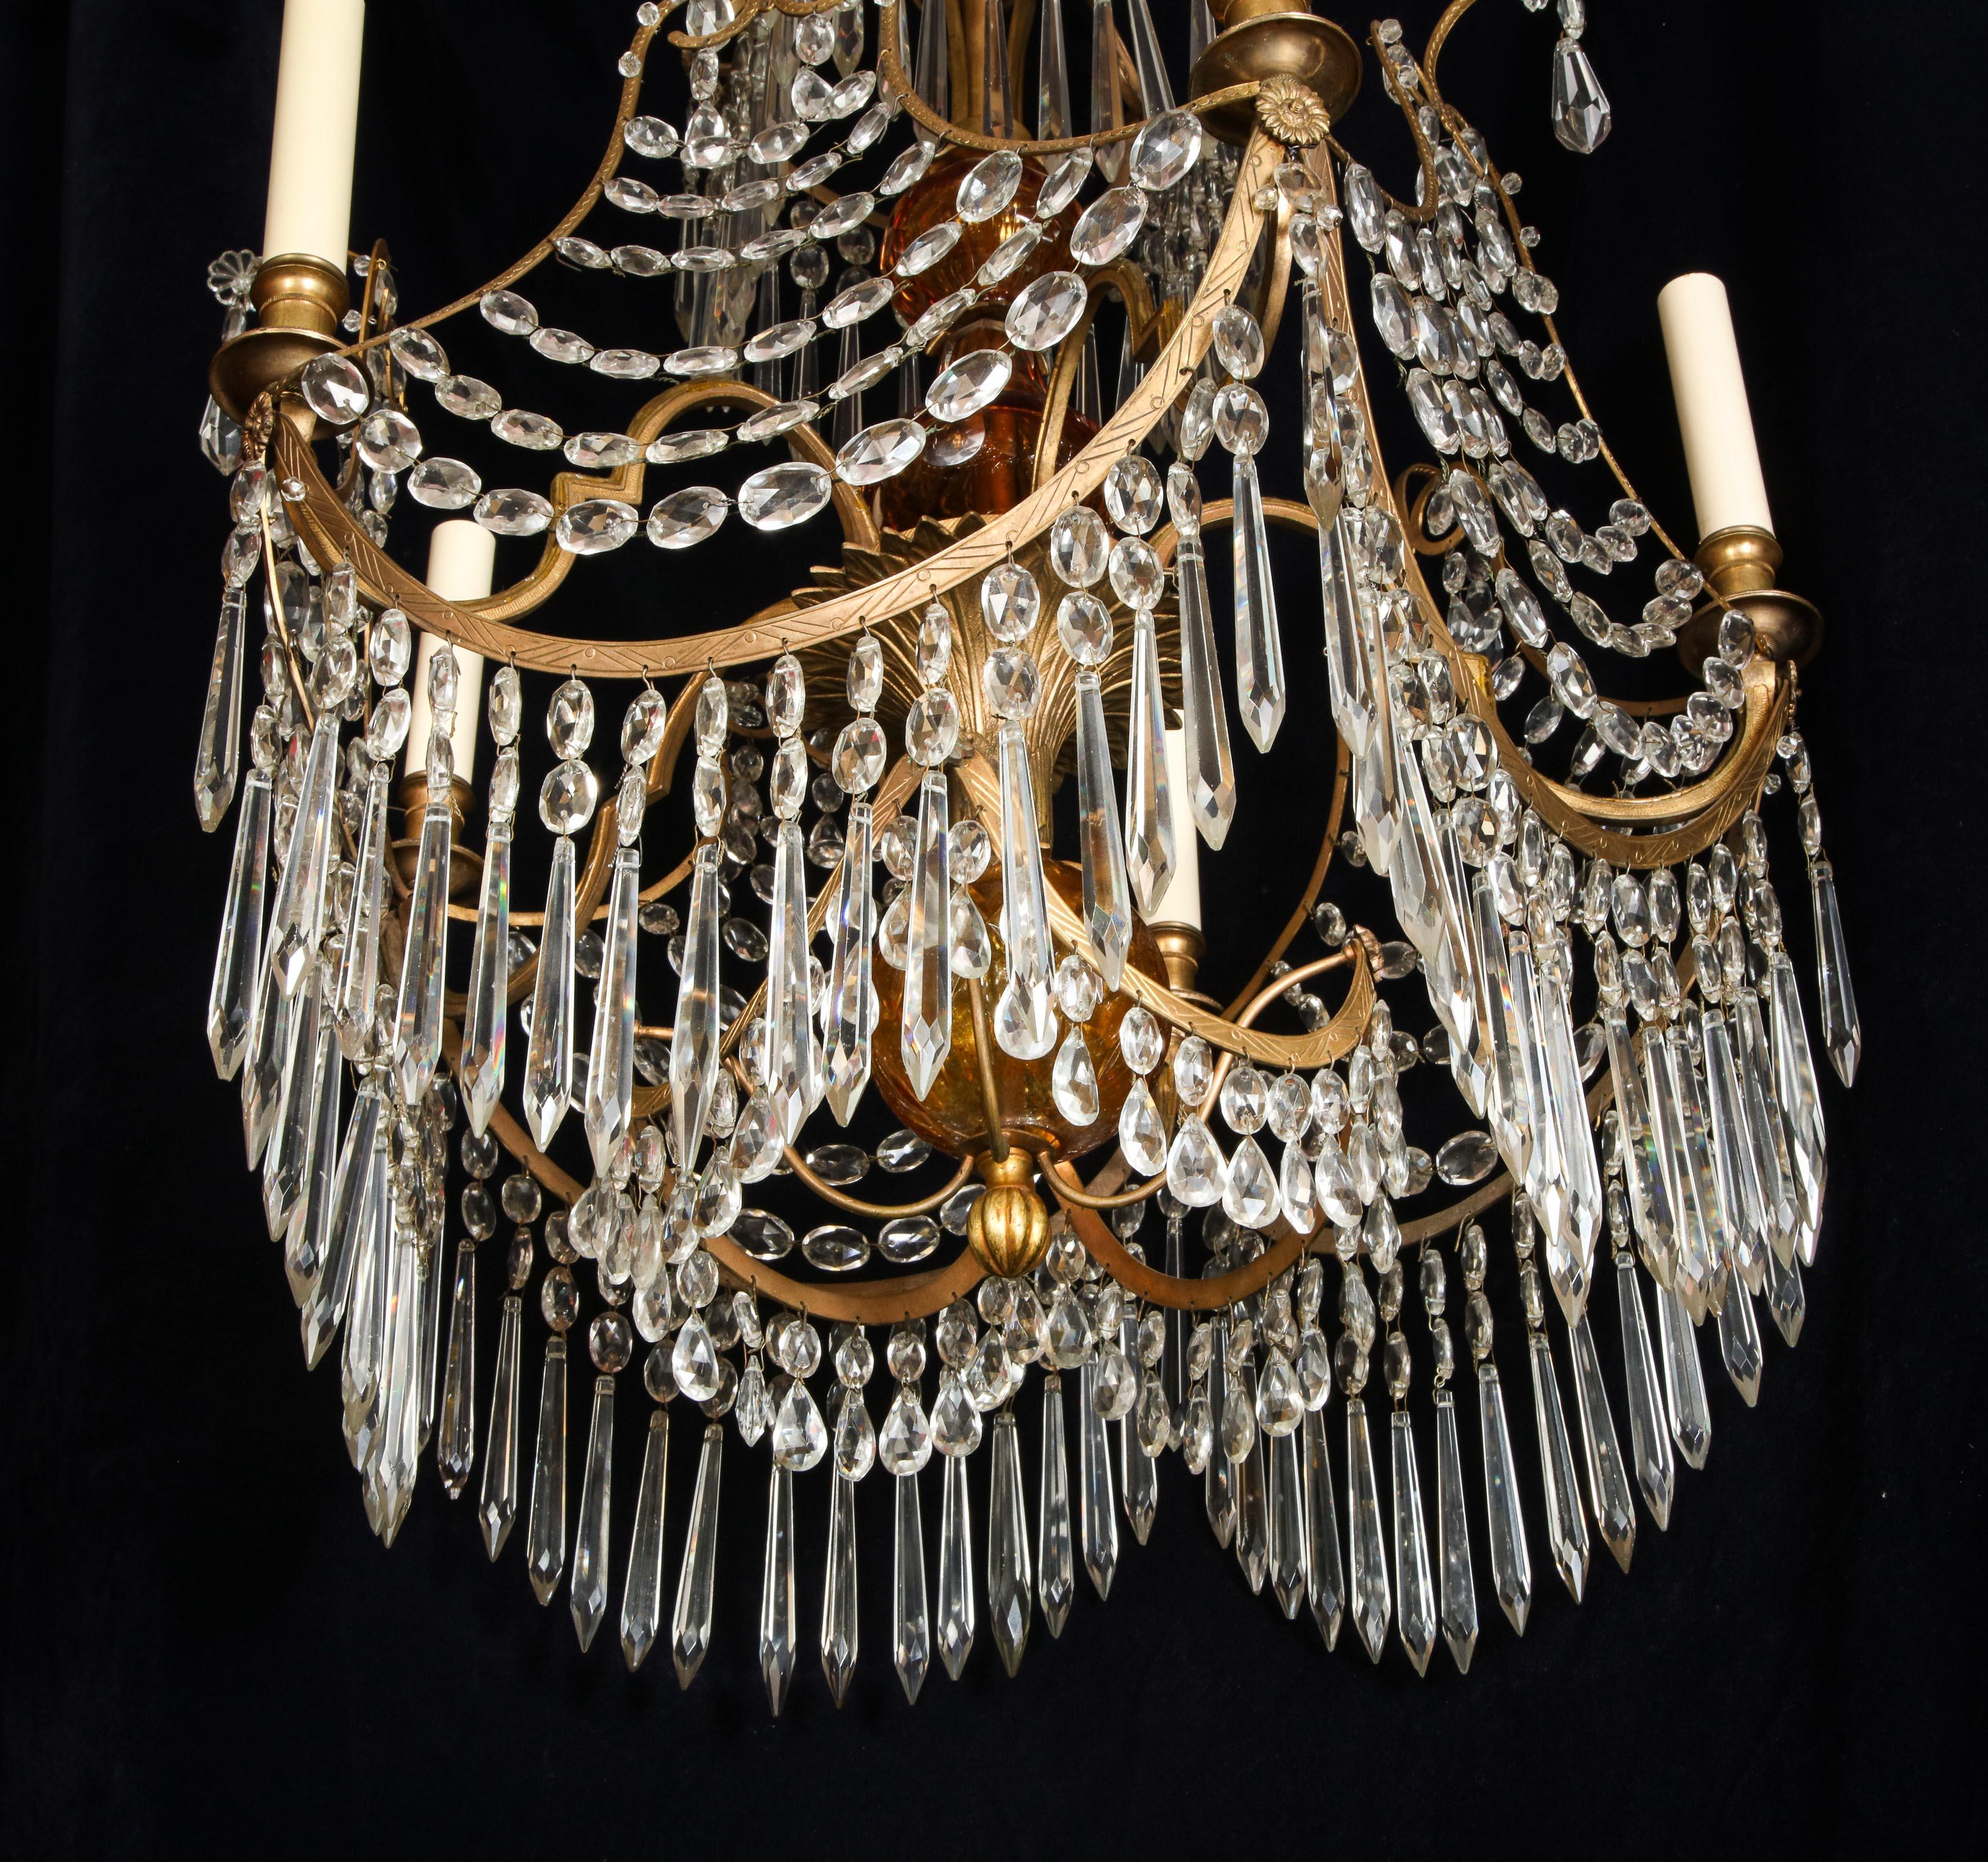 Rare Antique Russian Neoclassical Gilt Bronze and Amber Glass Chandelier For Sale 11